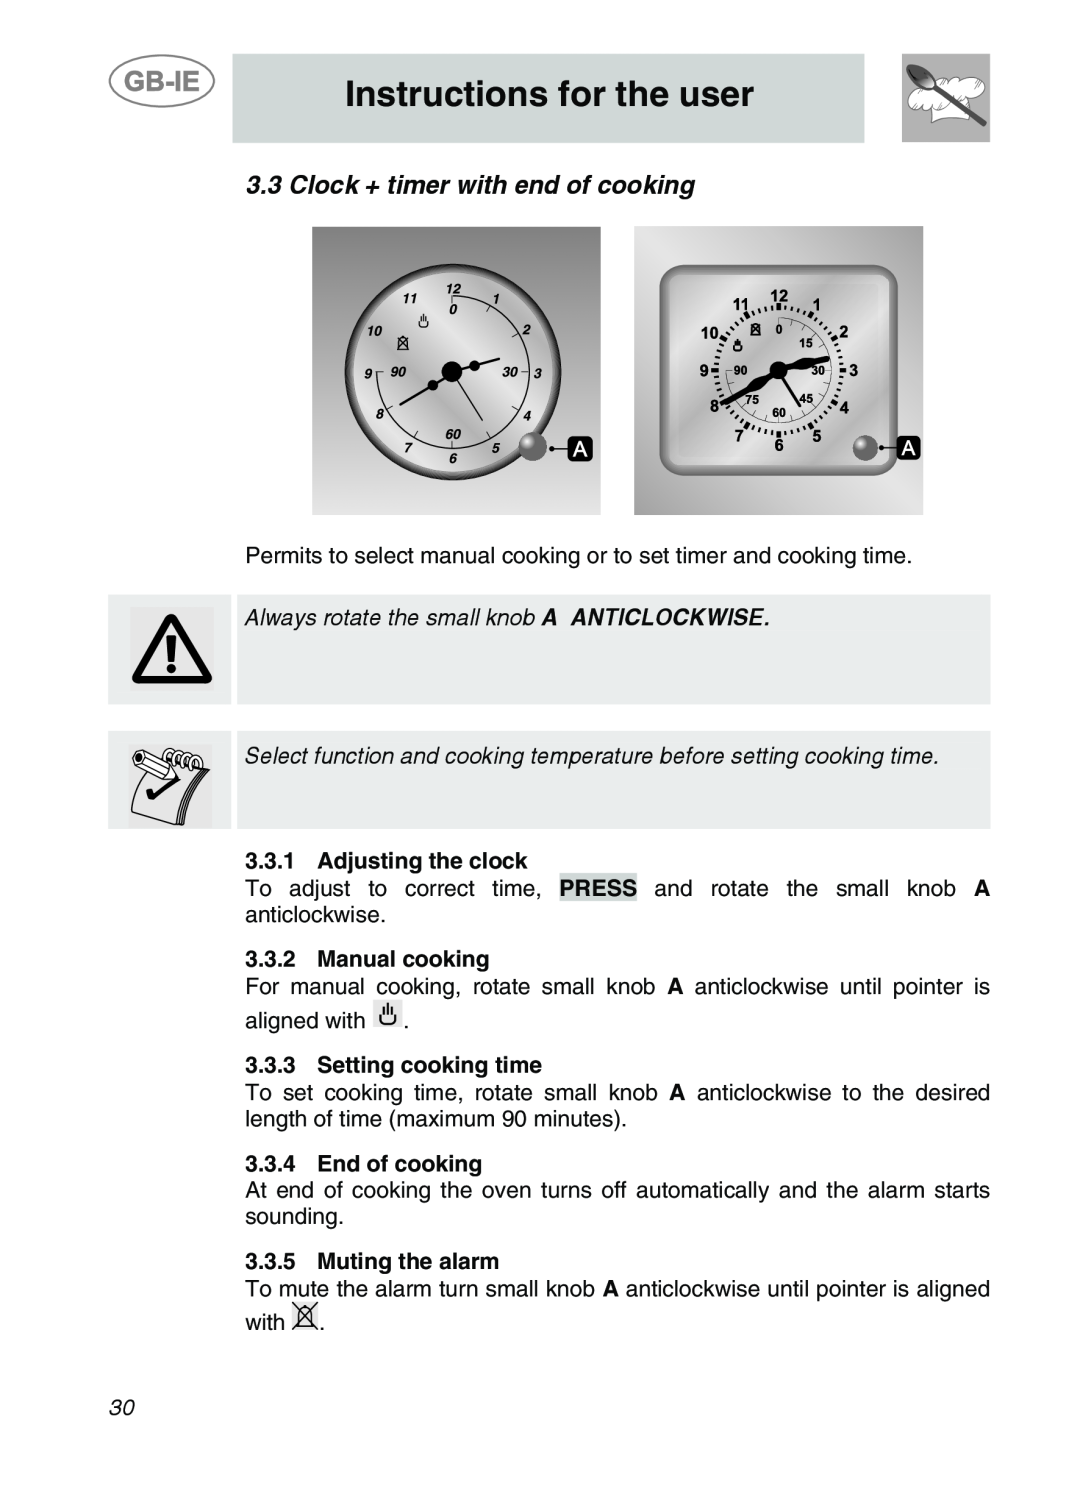 Smeg 9FBYON Clock + timer with end of cooking, Instructions for the user, Always rotate the small knob A ANTICLOCKWISE 